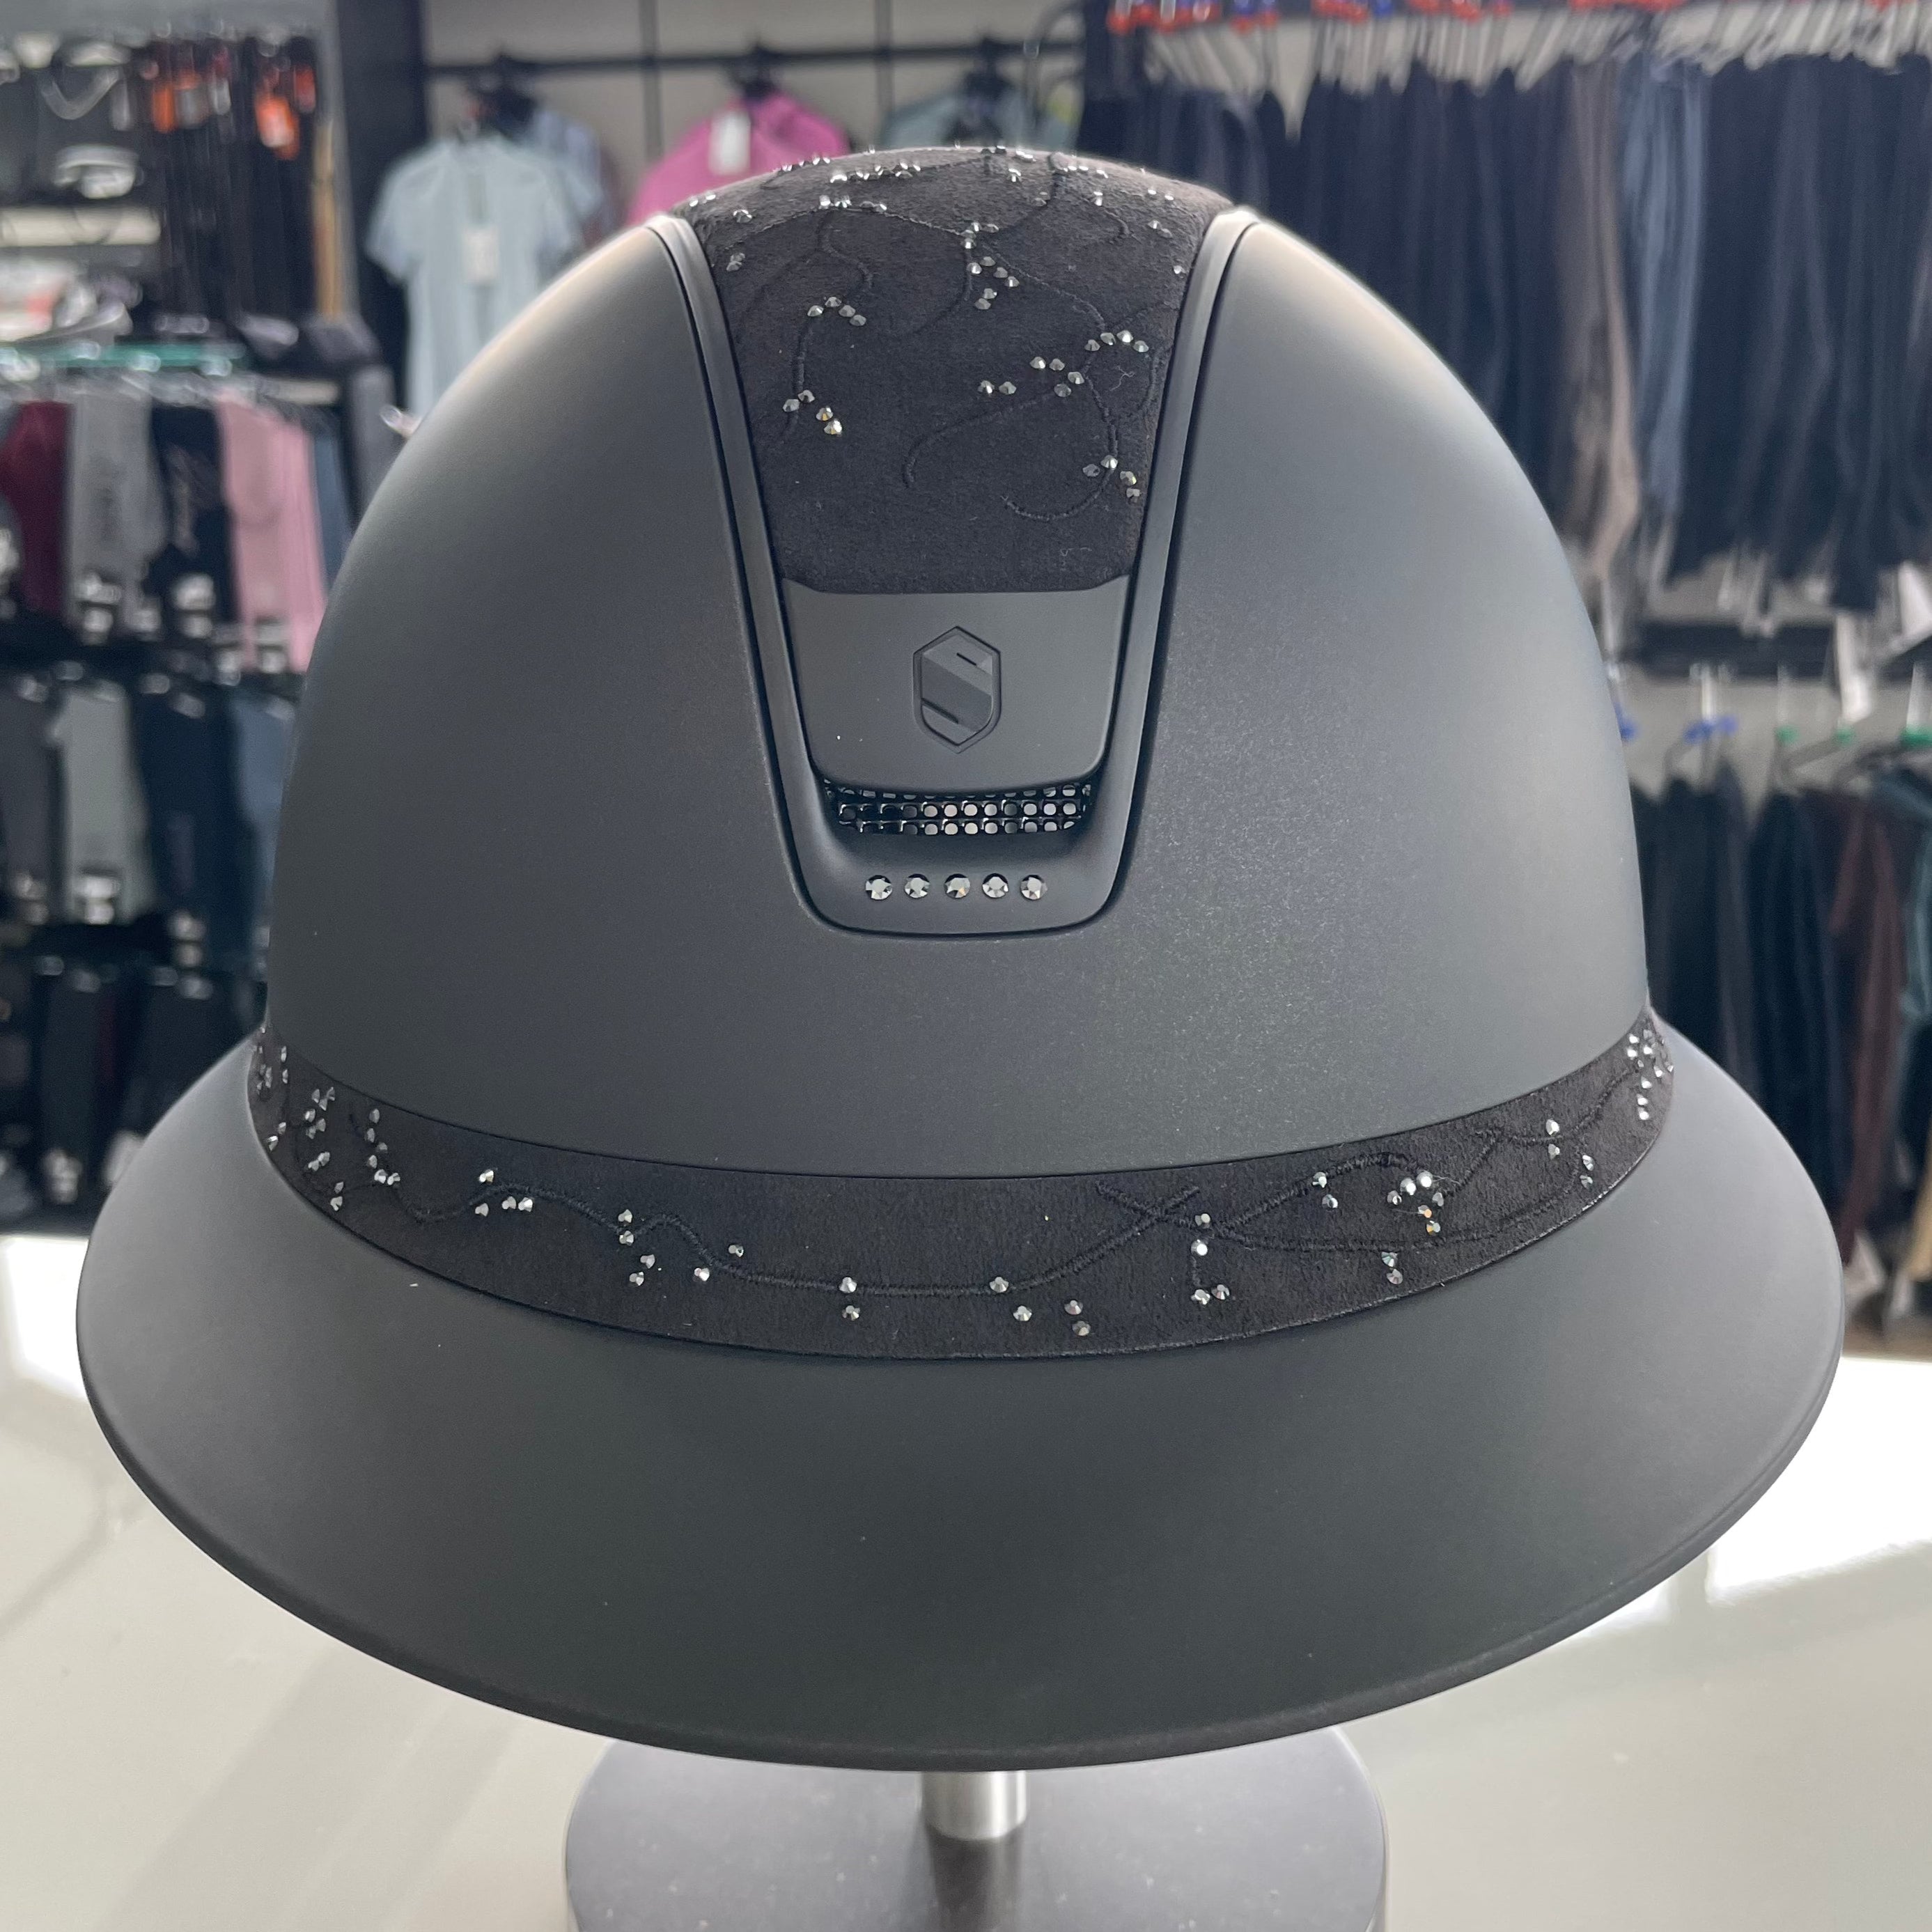 Samshield MissShield Black Matt with 5 crystals, crystal leaf top and frontal band 2.0 (M and L available)- in stock and ready to ship!